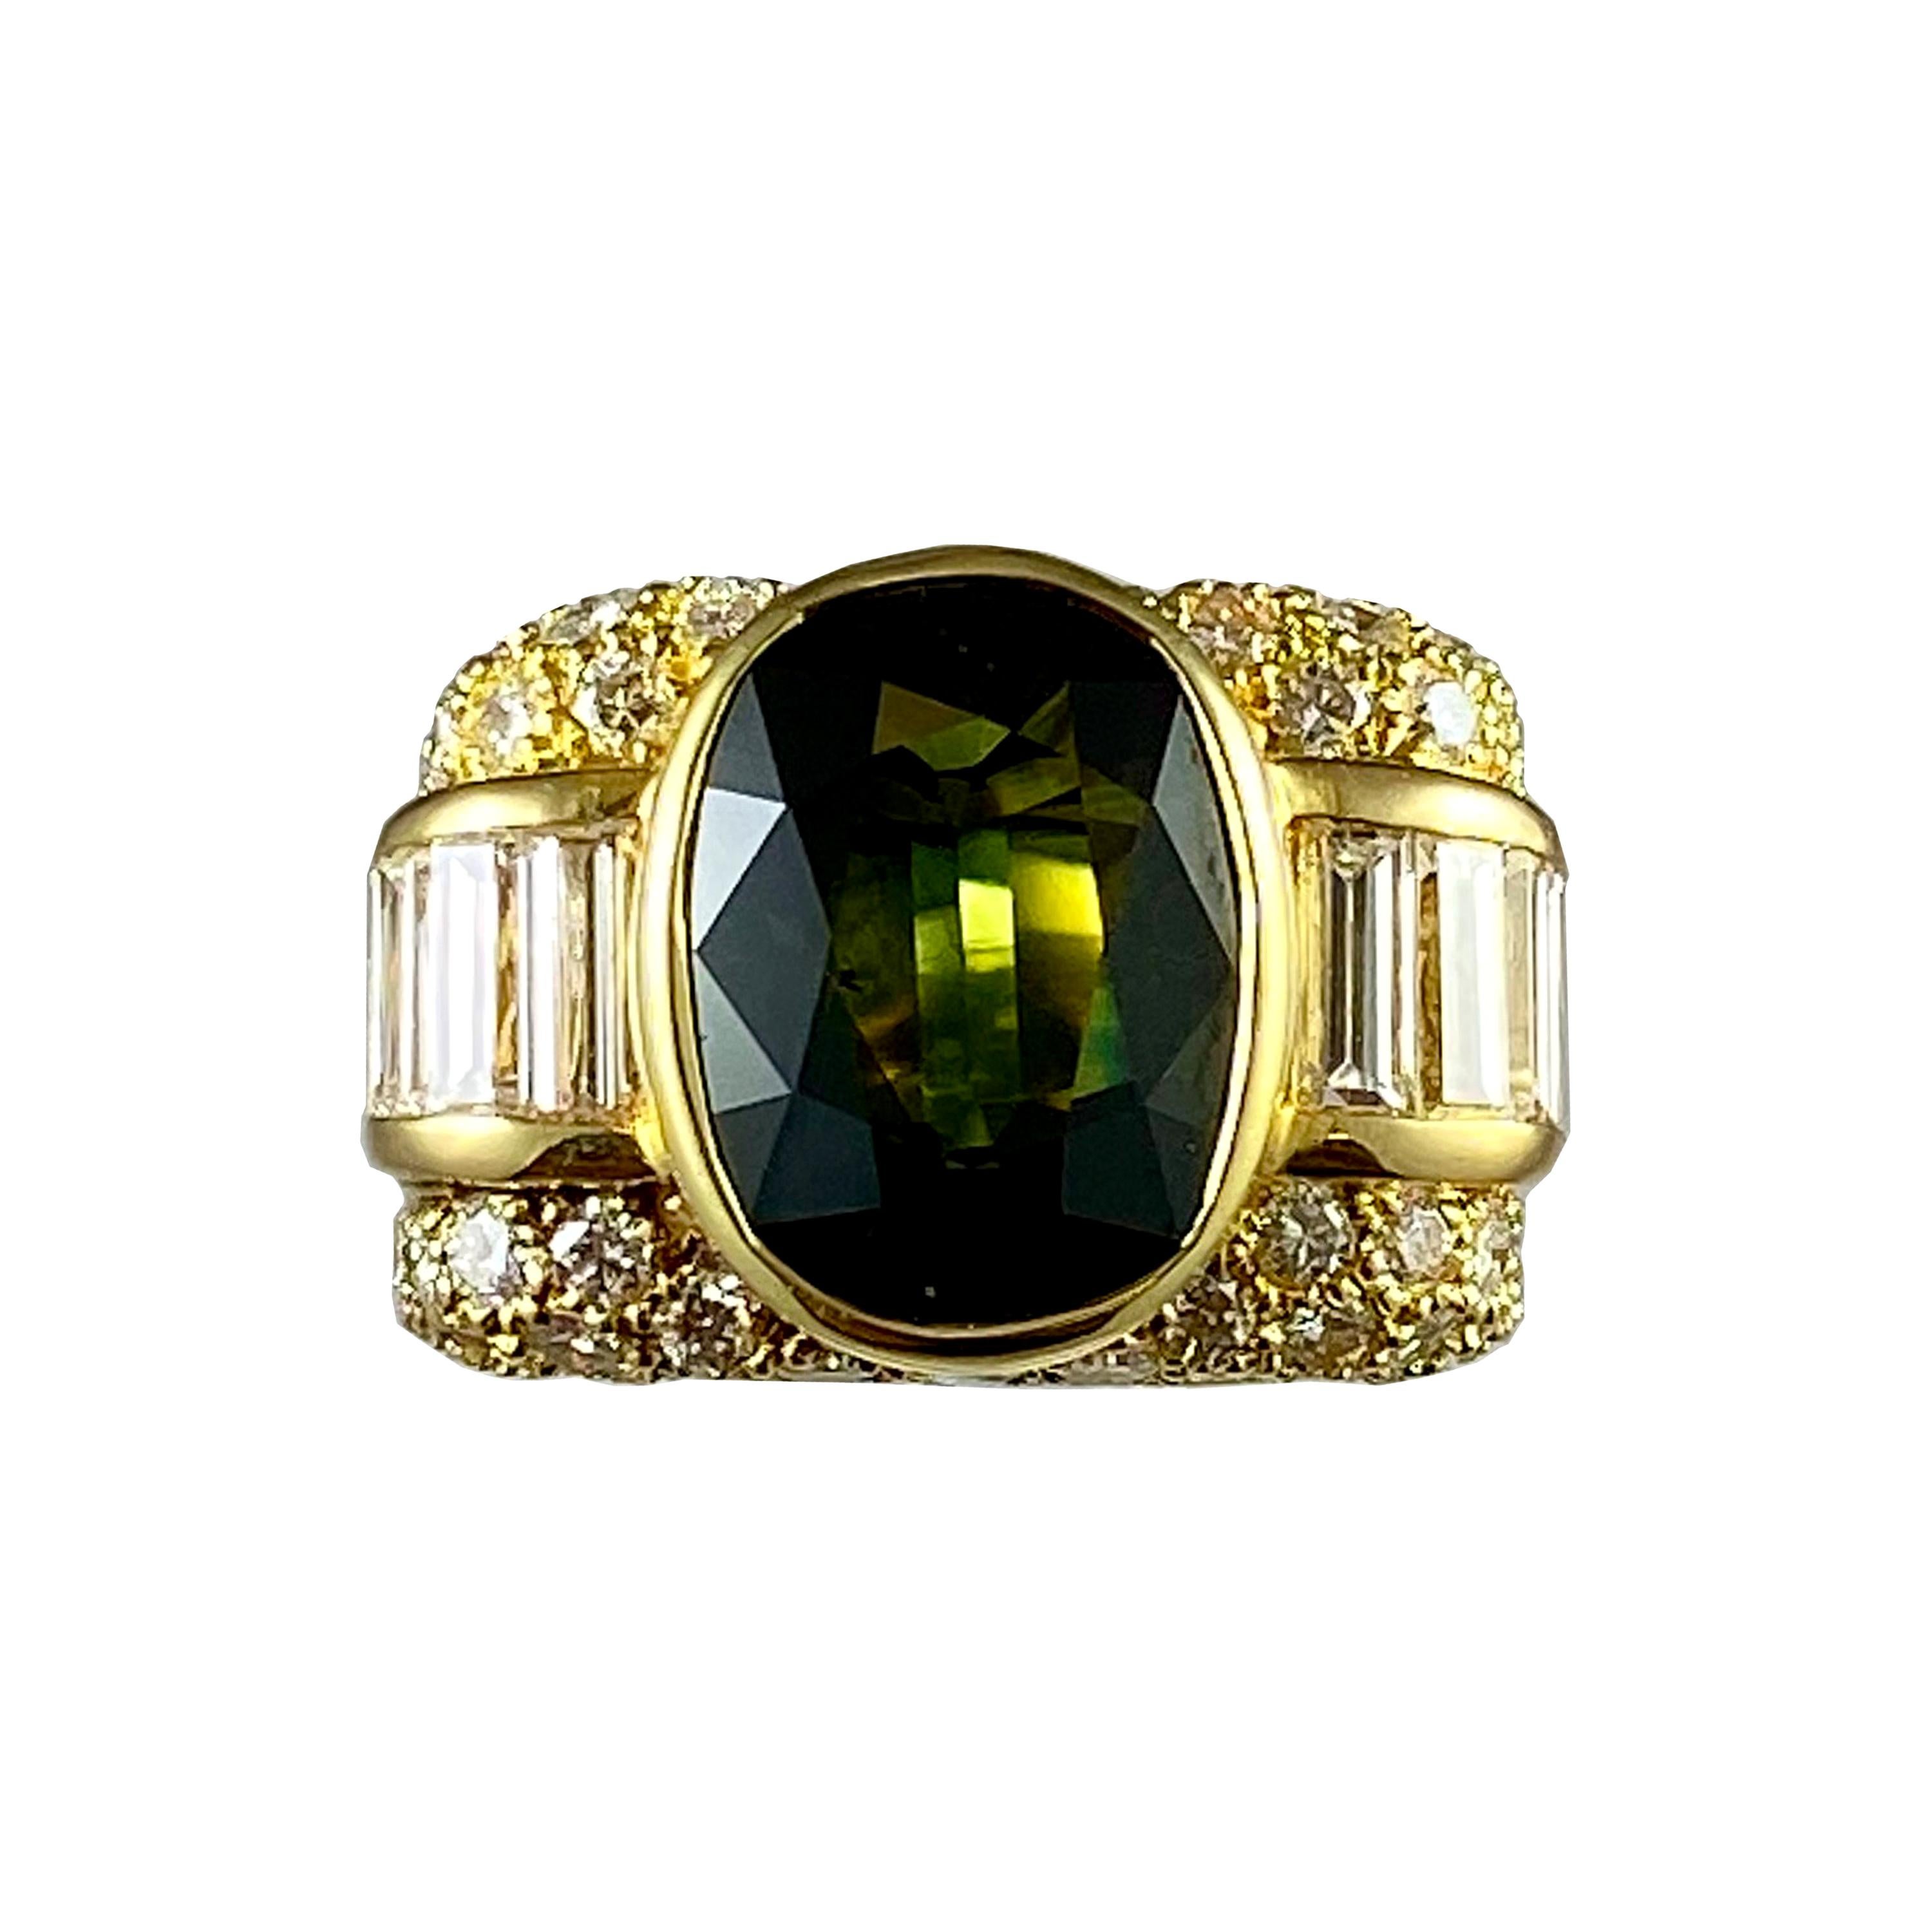 Hammerman Brothers Green Sapphire and Diamond Cocktail Ring For Sale